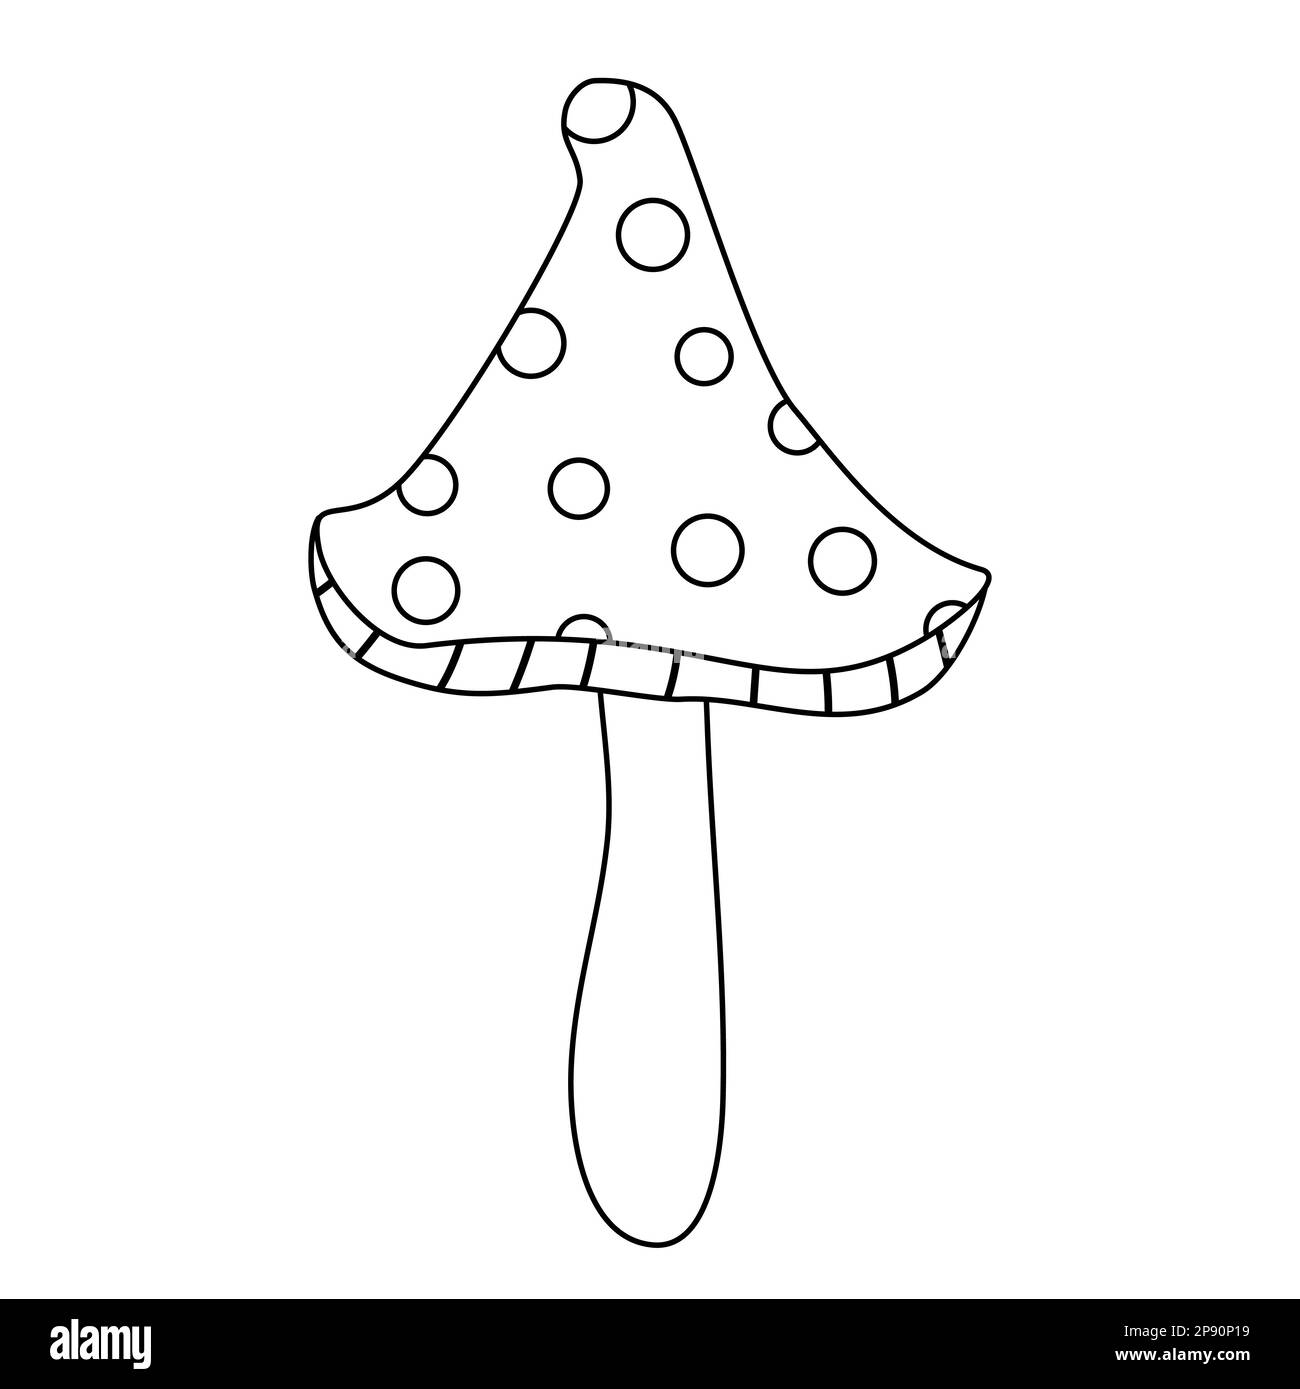 Poison mushroom with dots, doodle style flat vector outline illustration for kids coloring book Stock Vector